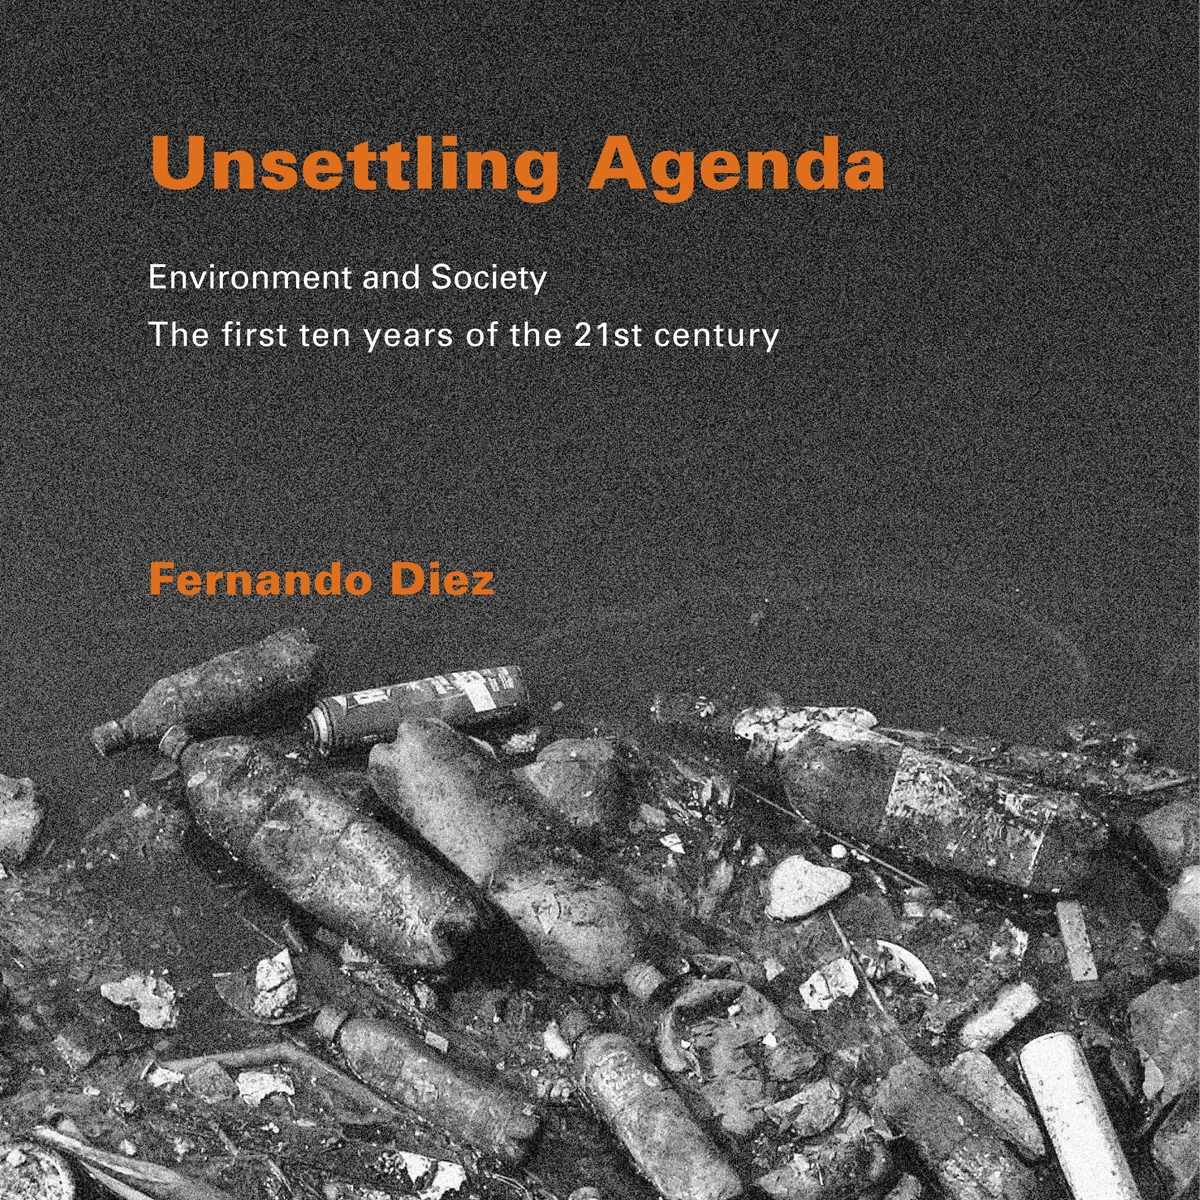 Unsettling Agenda:  Environment and Society